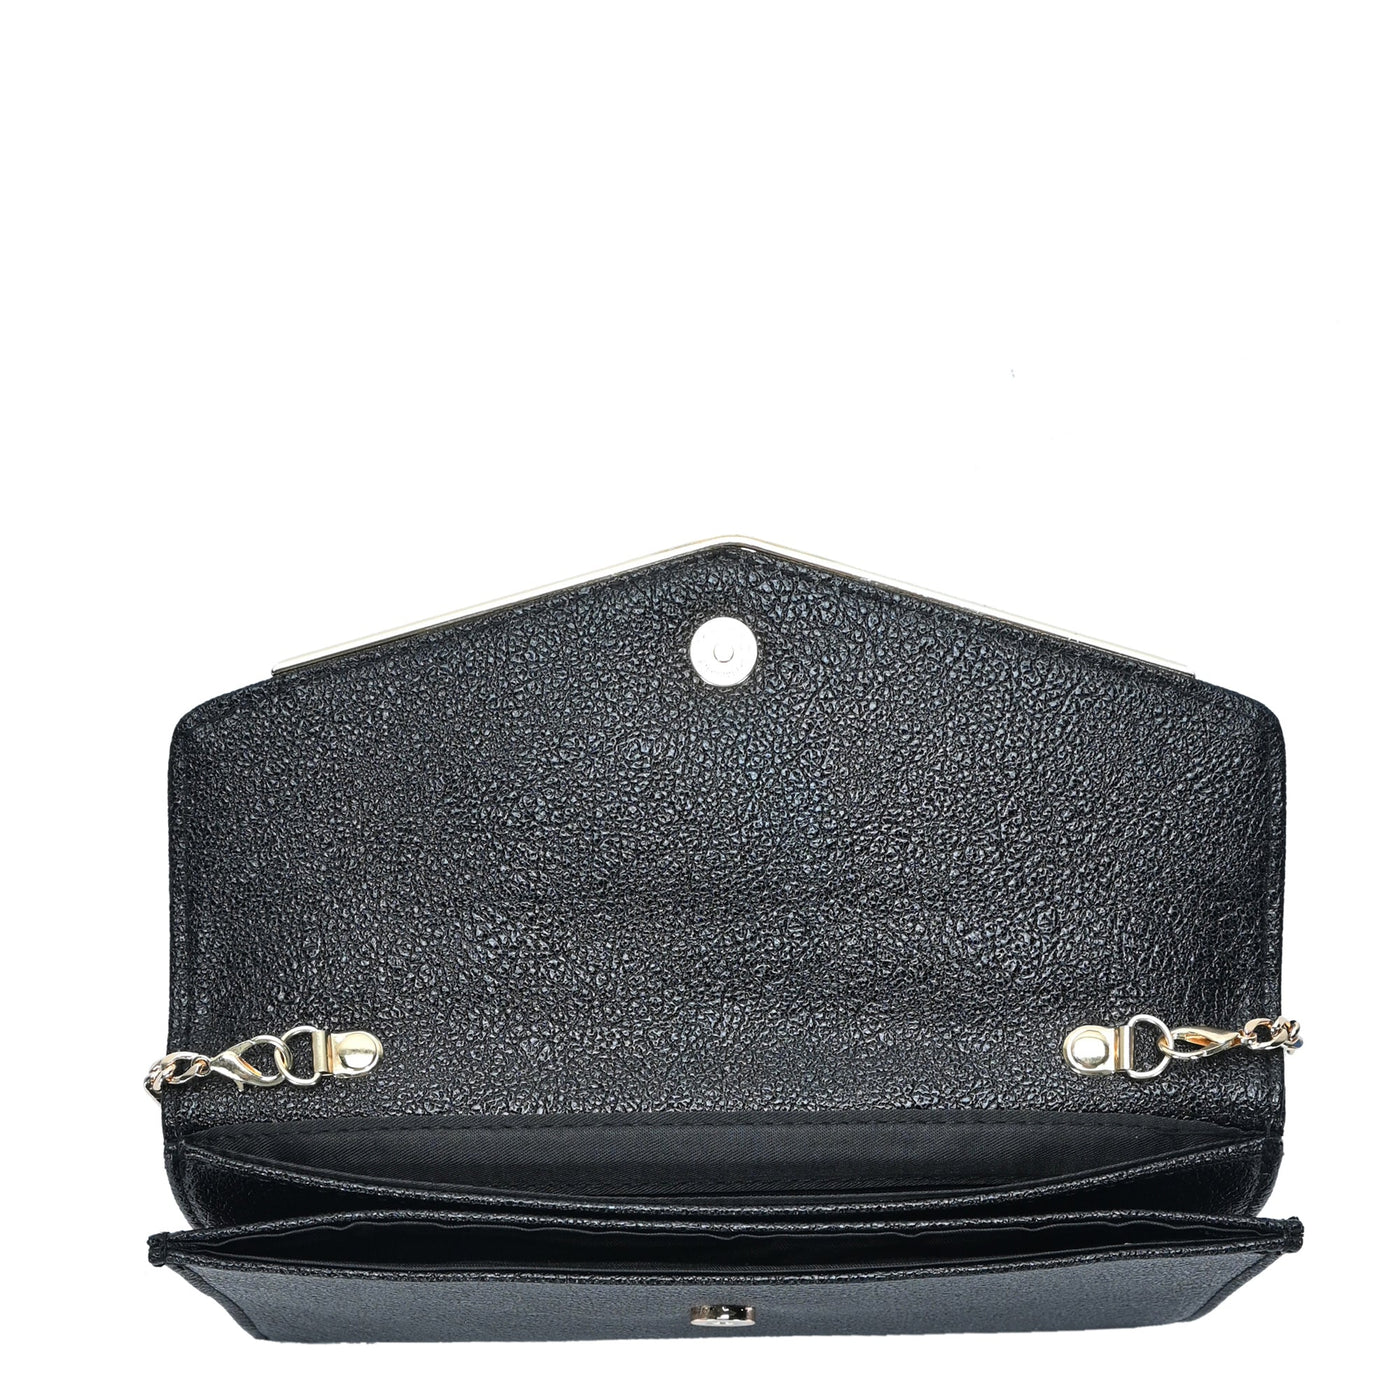 BGW47132 Sharice Envelope Clutch With Chain Strap